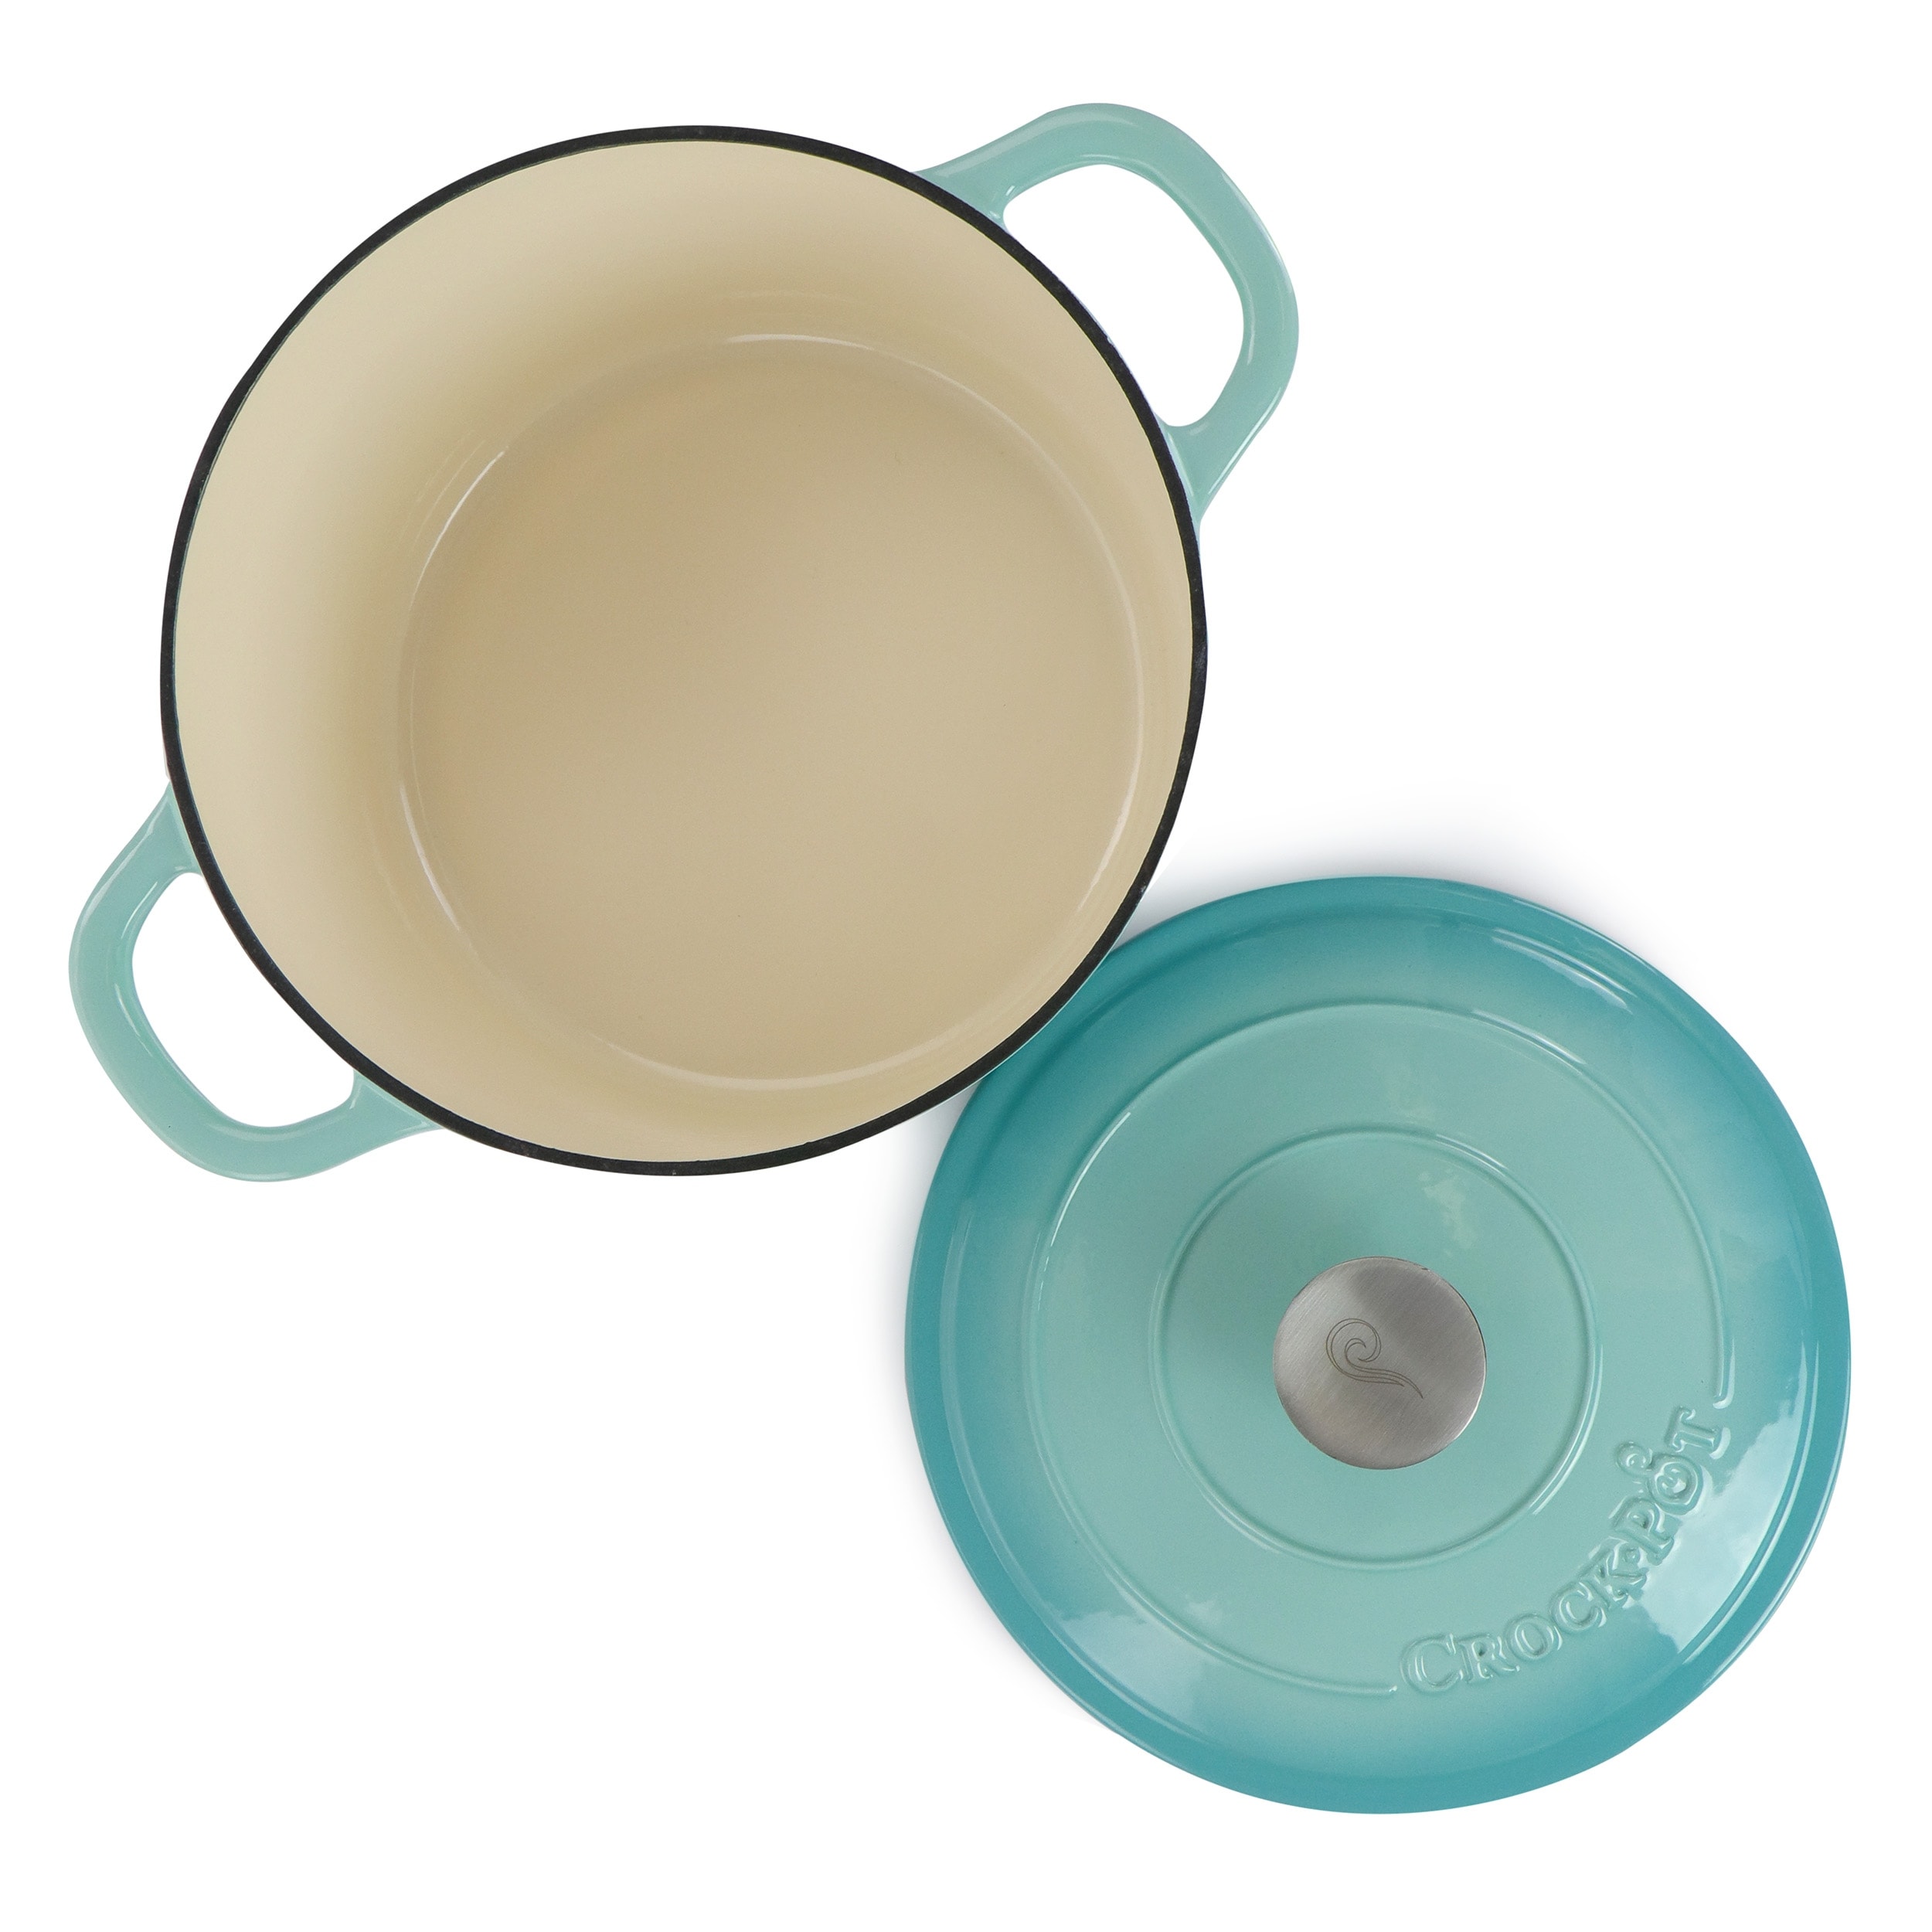 3 Quart Enameled Cast Iron Dutch Oven in Arctic Teal - Bed Bath & Beyond -  37451845